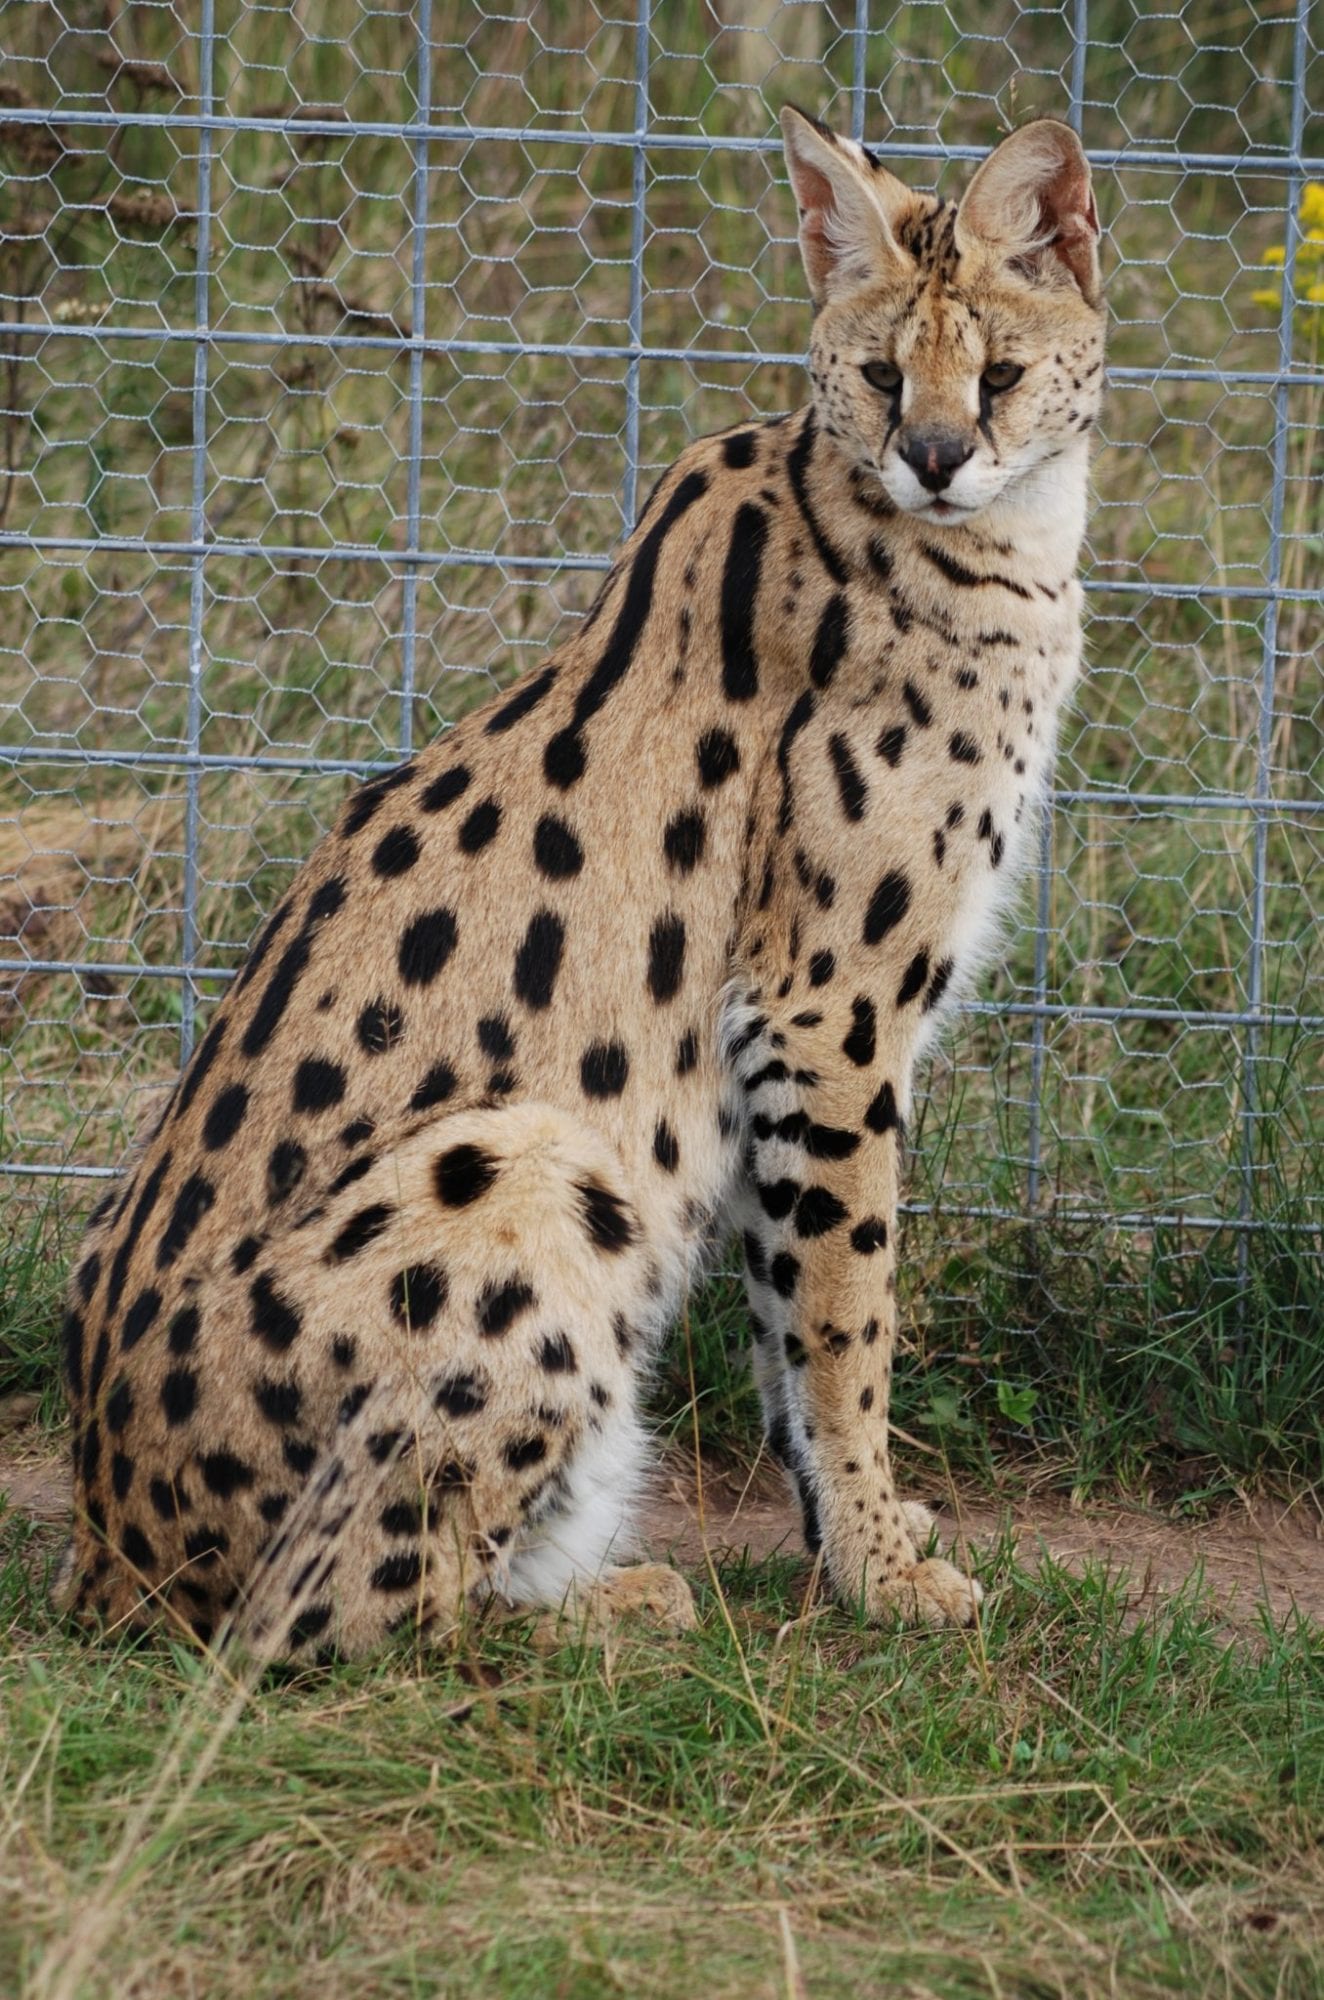 A serval cat against wire fence